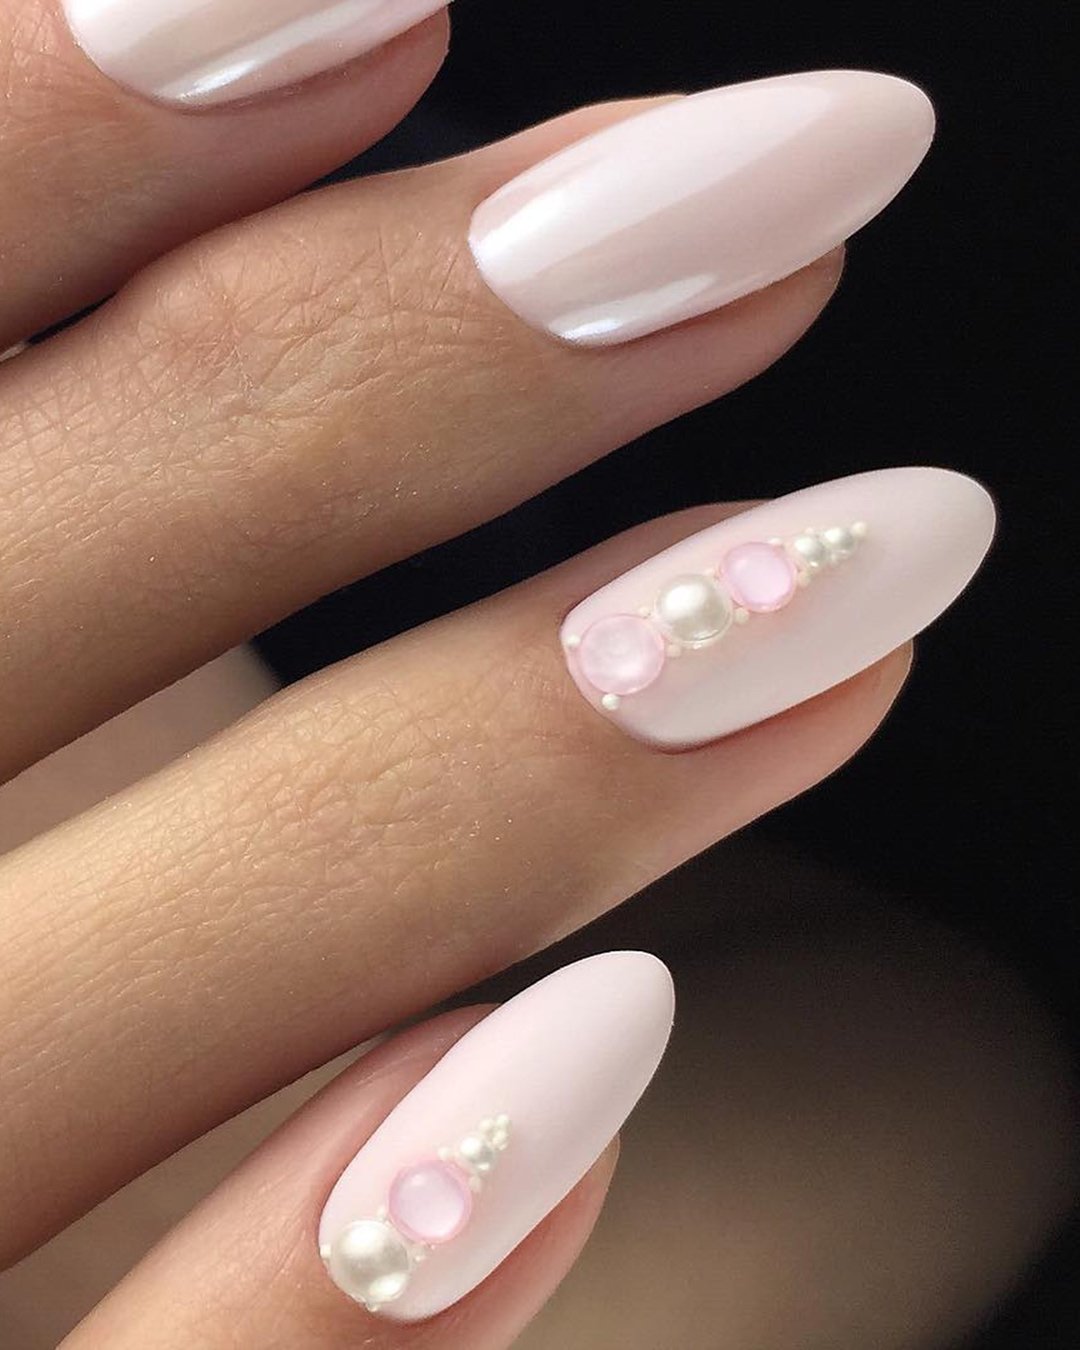 pinterest nails for wedding minimalistic elegant pink with pearls mariapro.nails